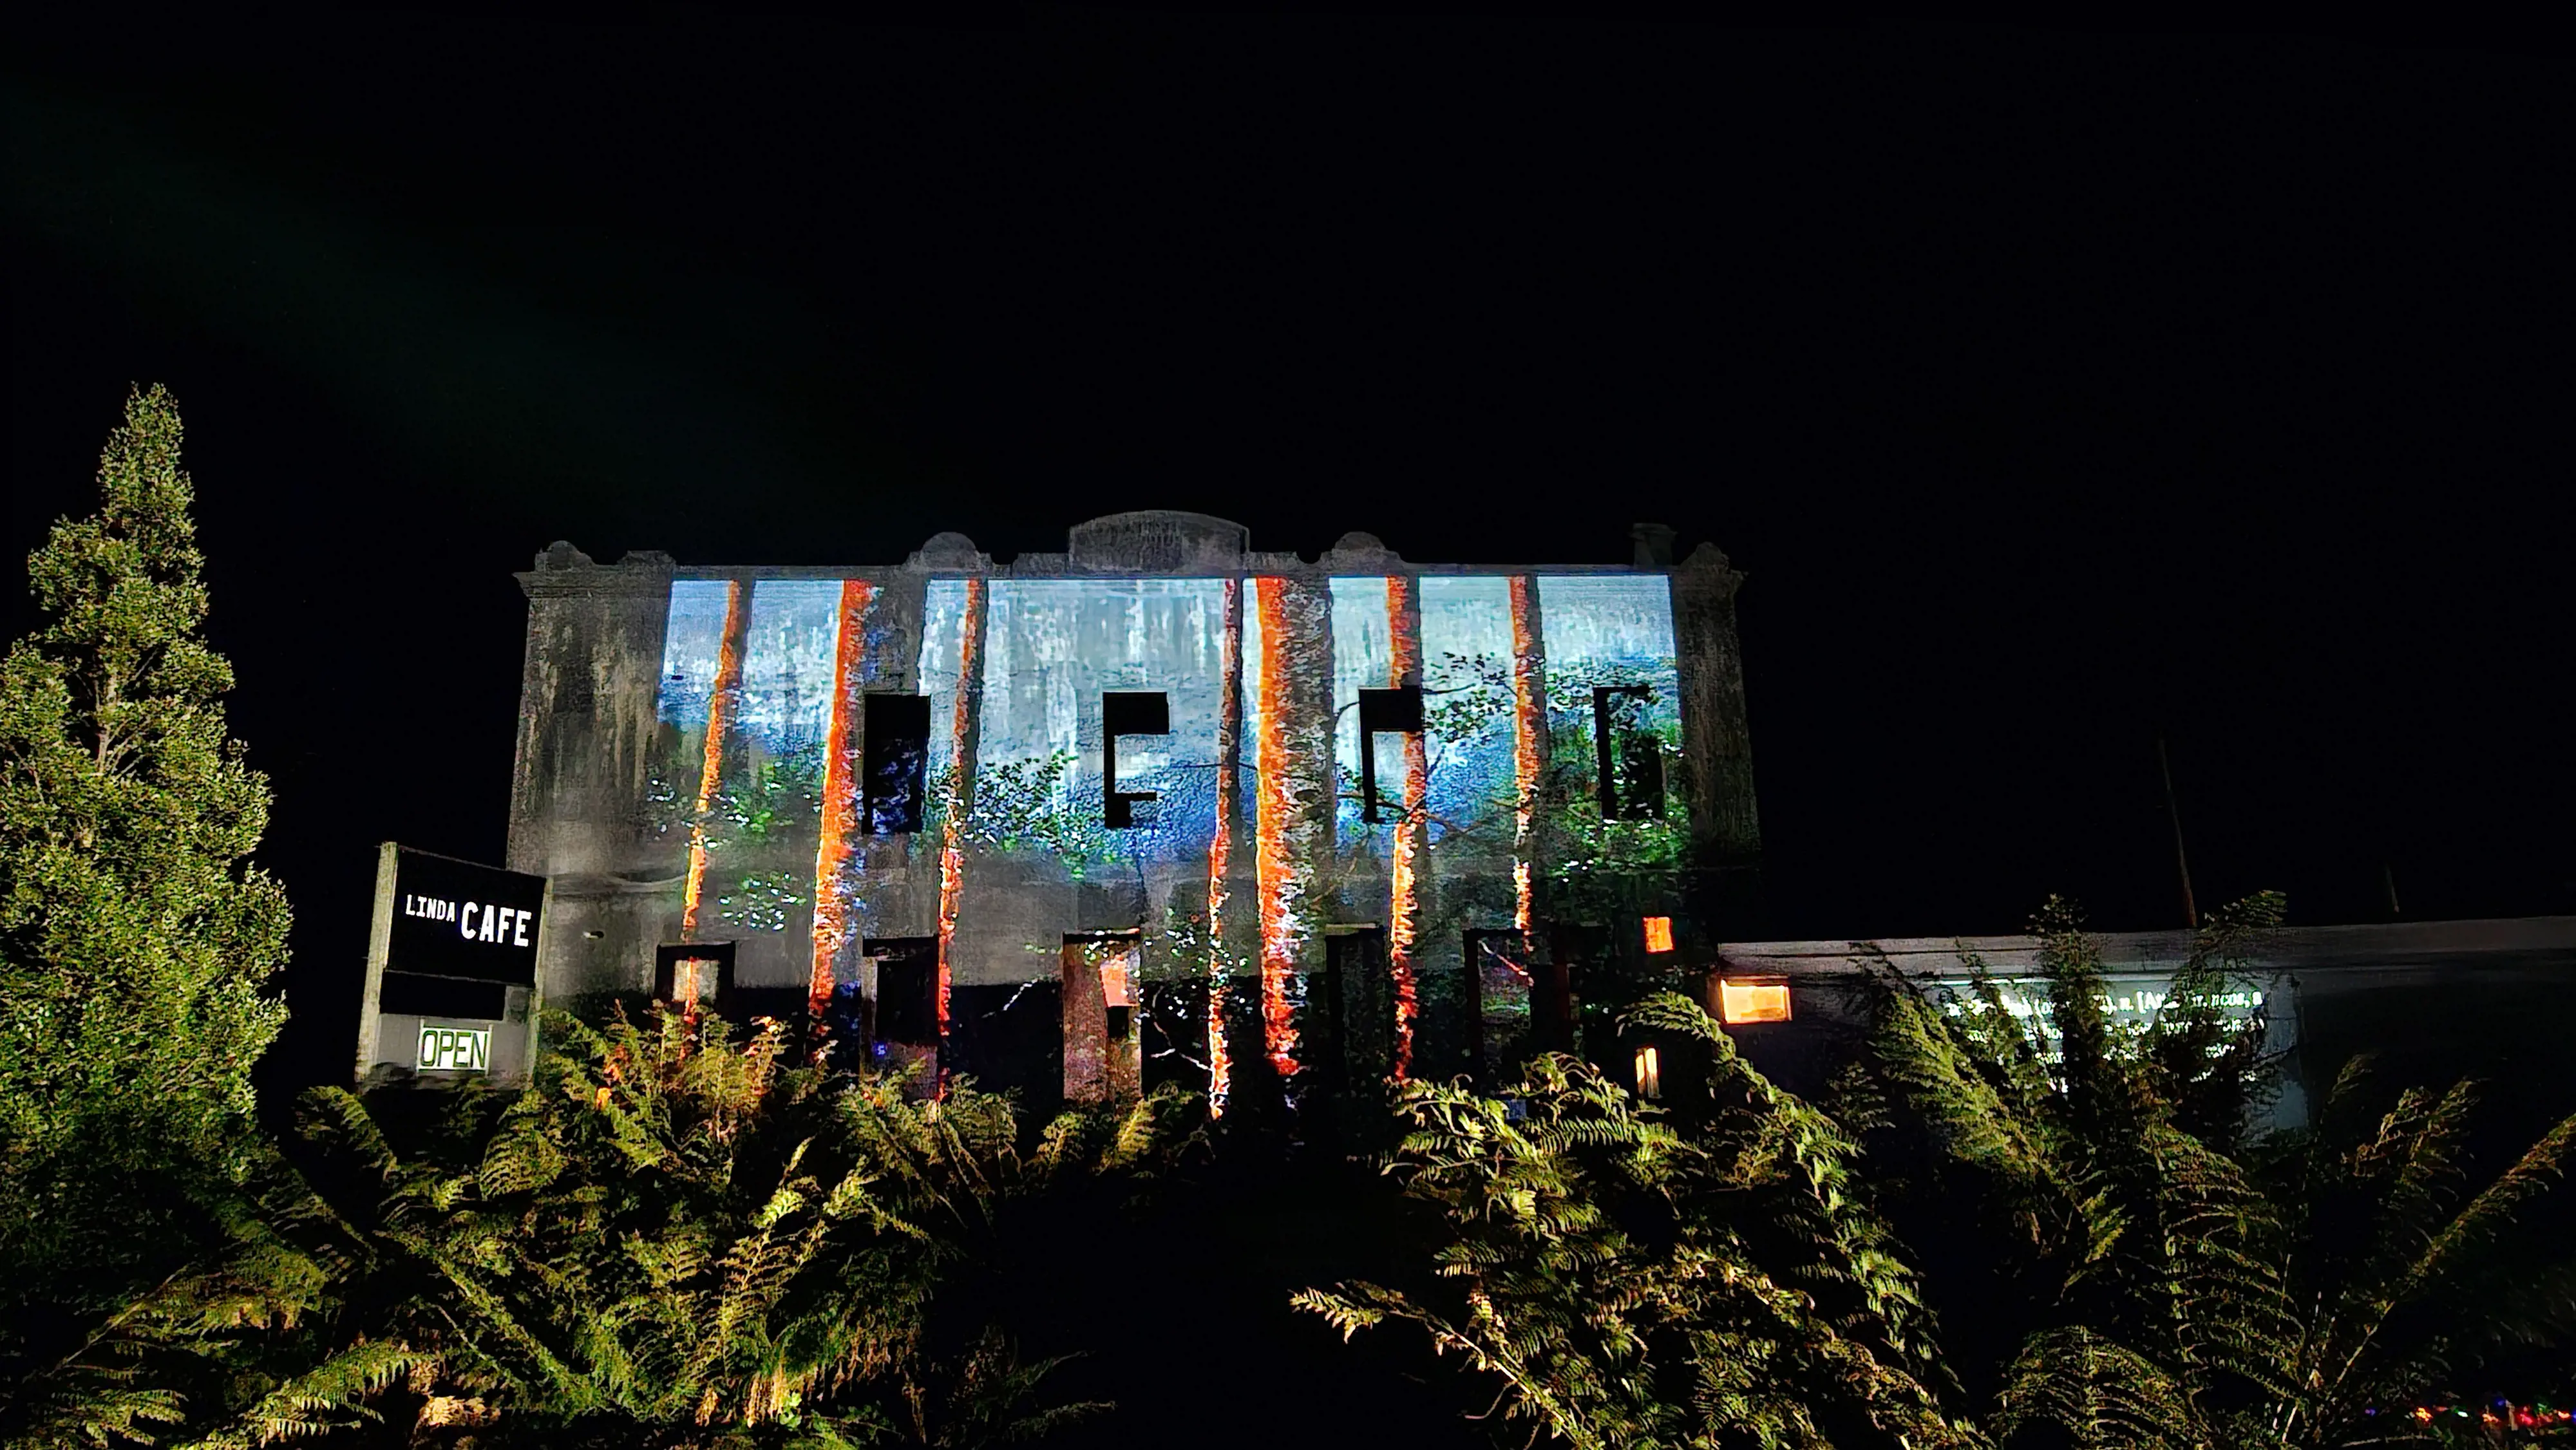 A bright projection of tall pine trees in a forest is displayed on the front facade of the Royal Hotel near the cafe.